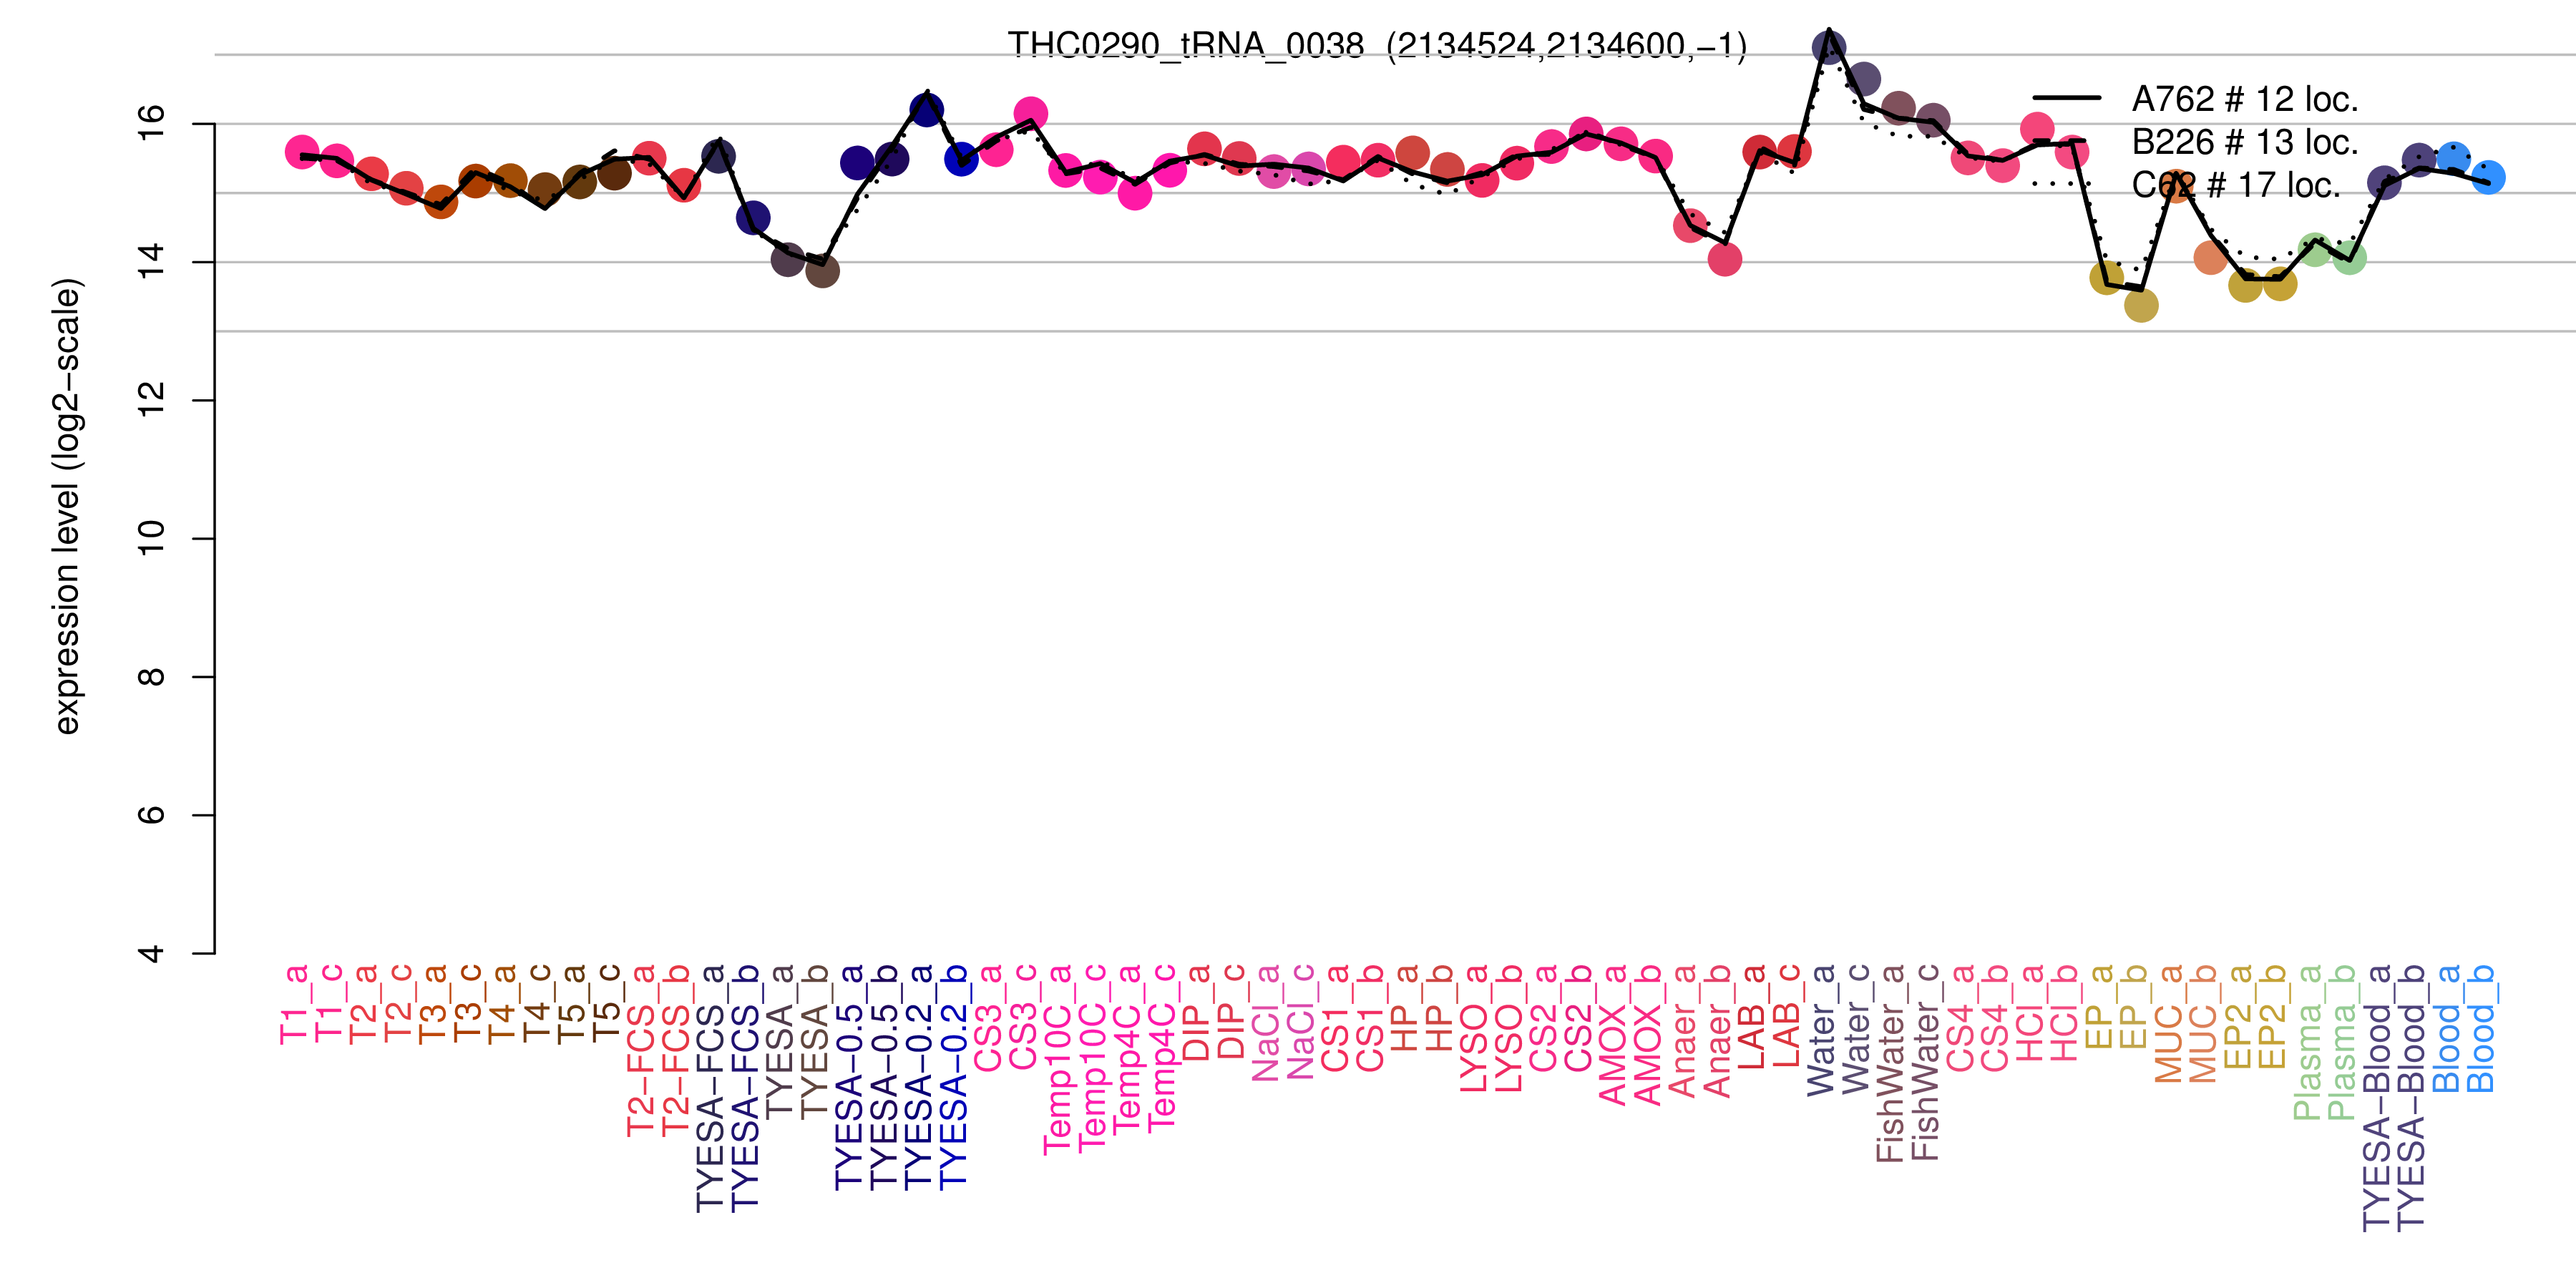 THC0290_tRNA_0038 expression levels among conditions